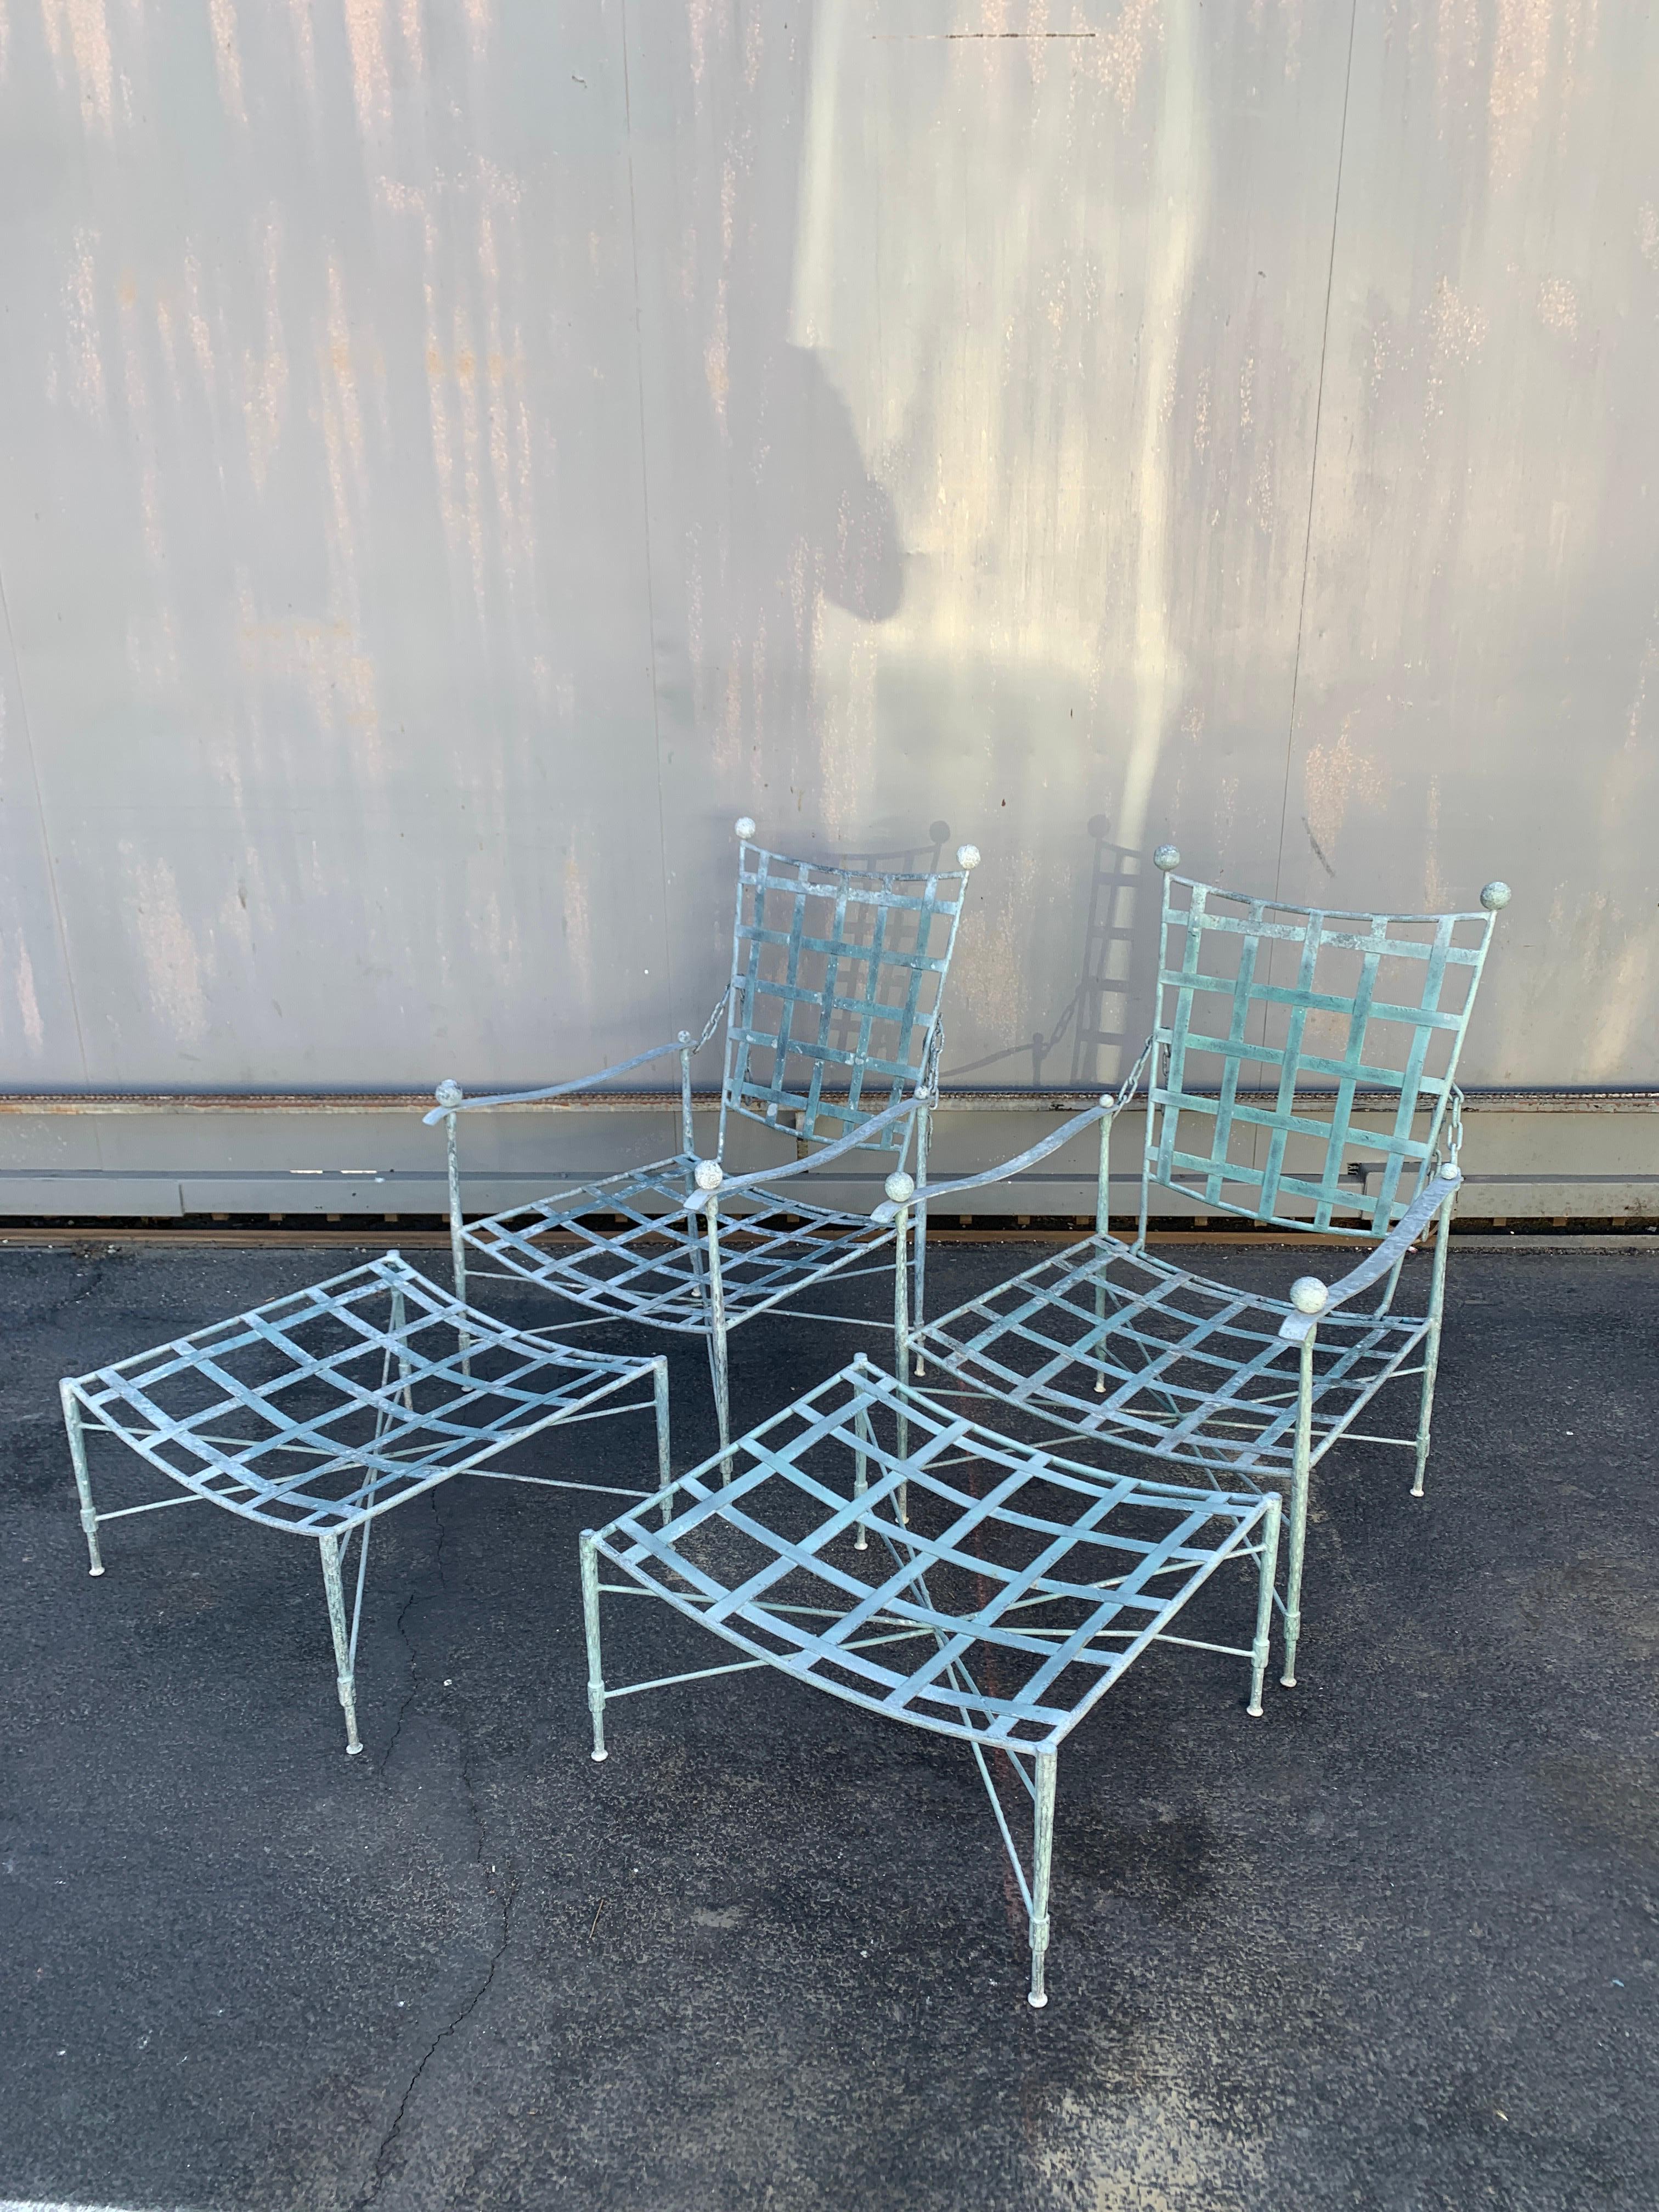 Pair of Mario Papperzini chairs and ottomans for John Salterini - beautifully patinated and difficult to find, we are offering a pair of Salterini Patio Chairs in a wonderful Verdigris Green original finish. The chairs have the iconic chains on the